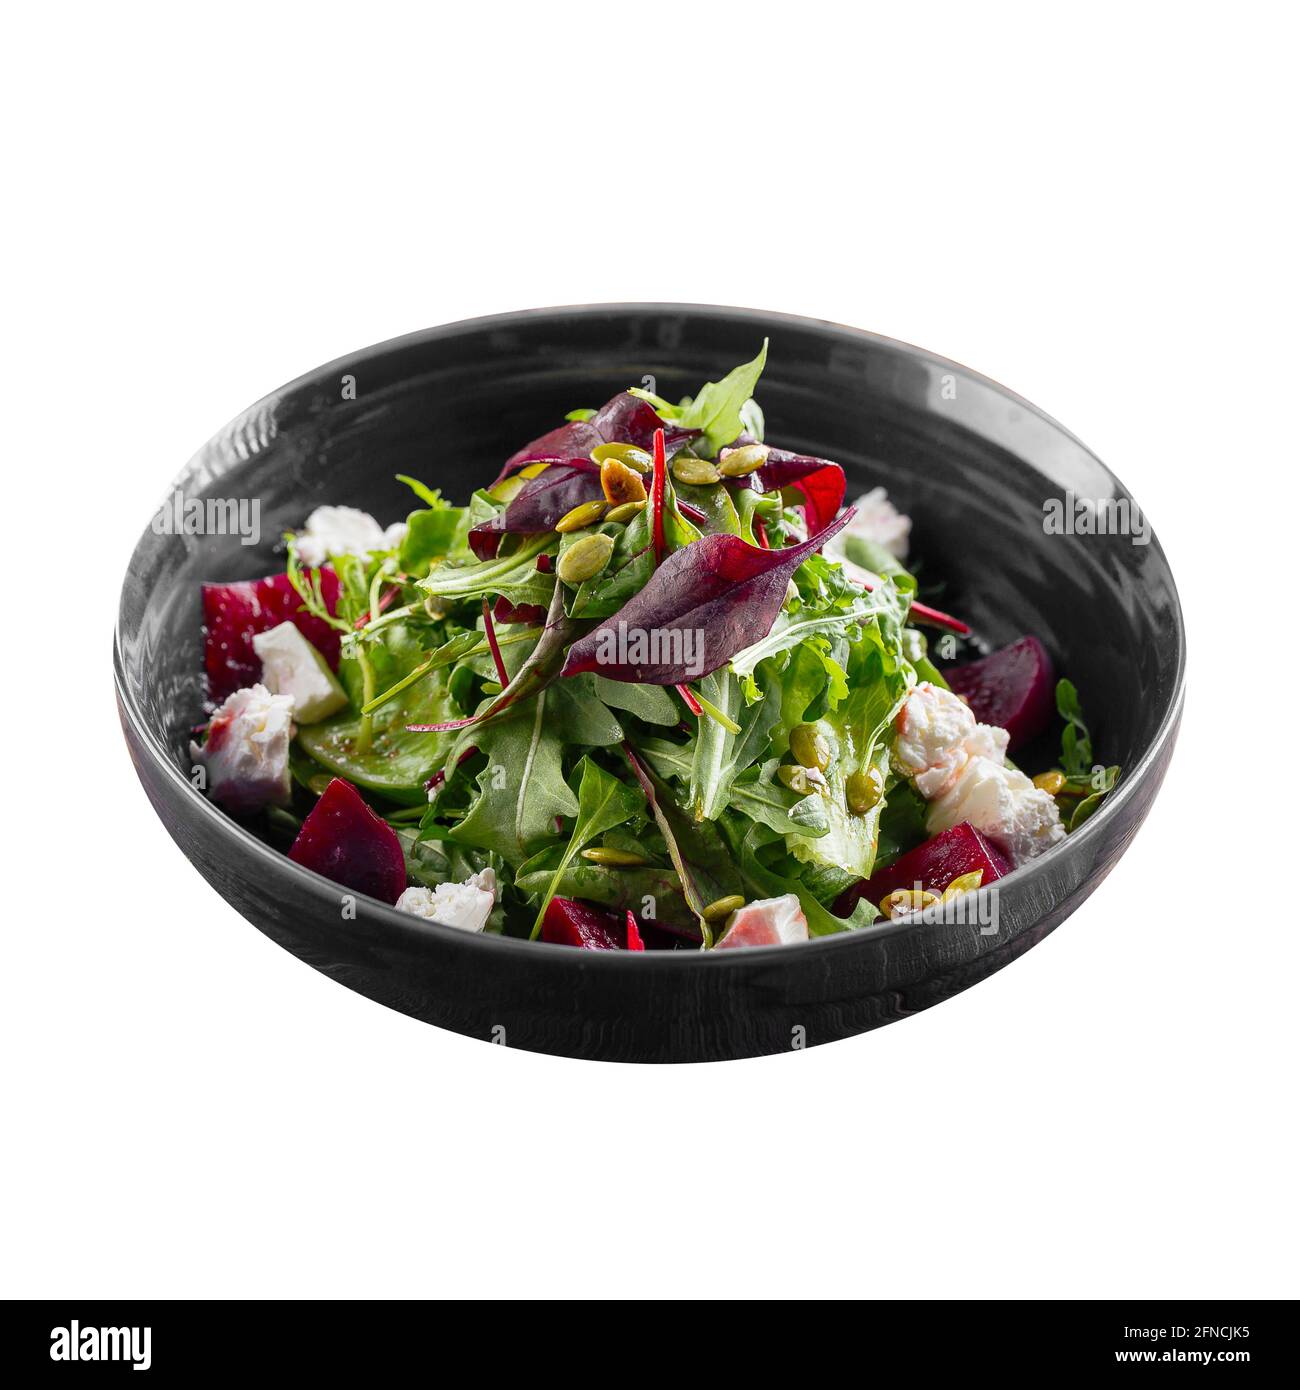 Isolated bowl of beetroot salad with feta cheese Stock Photo